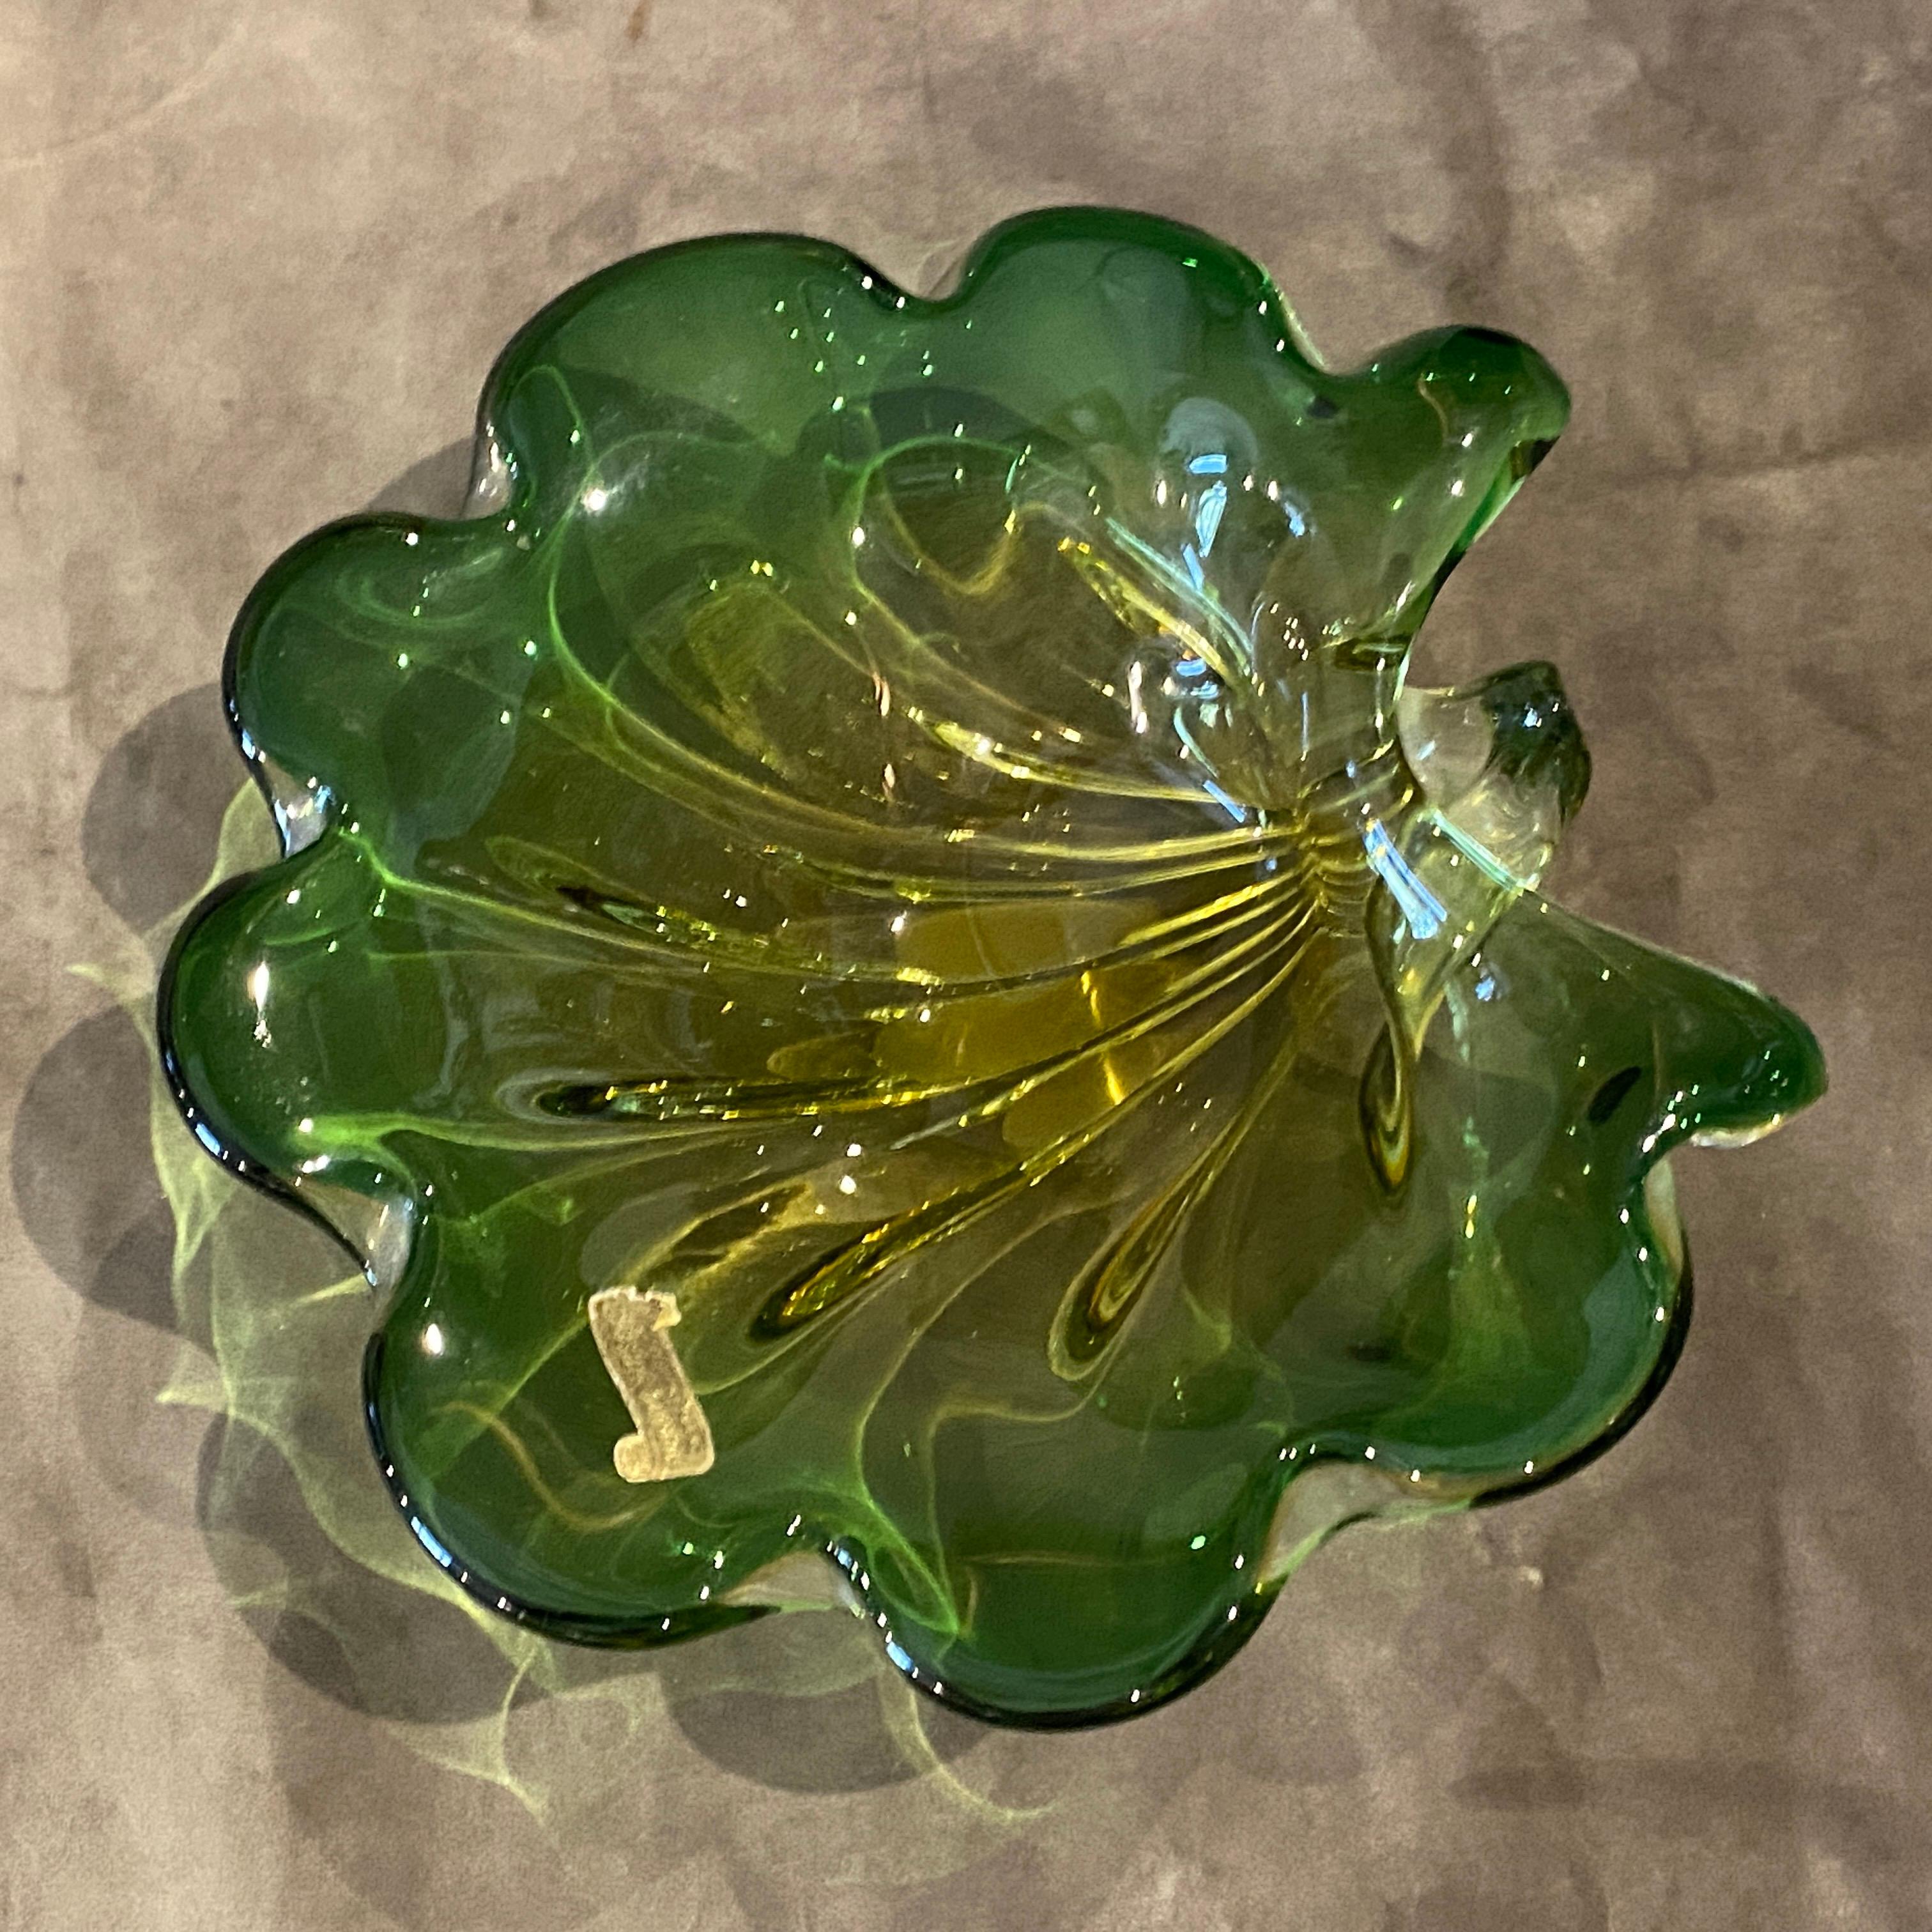 1970s Mid-Century Modern Green and Yellow Murano Glass Sea Shell Bowl by Seguso In Good Condition For Sale In Aci Castello, IT